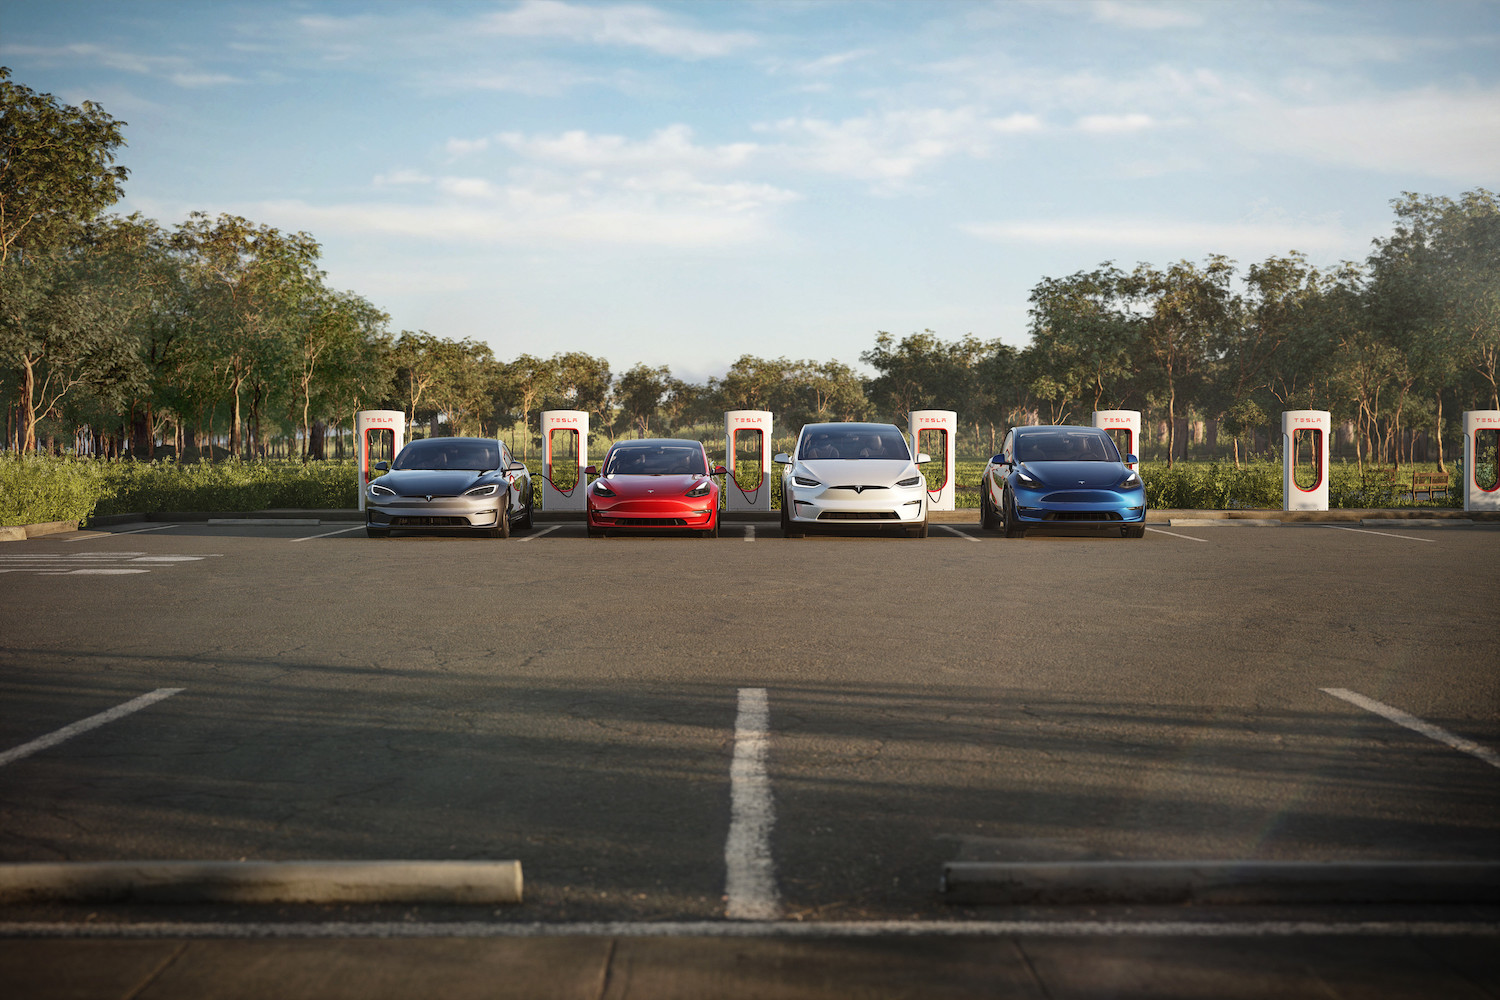 A row of used Tesla electric vehicles all plugged into Supercharger stations, trees visible in the background.